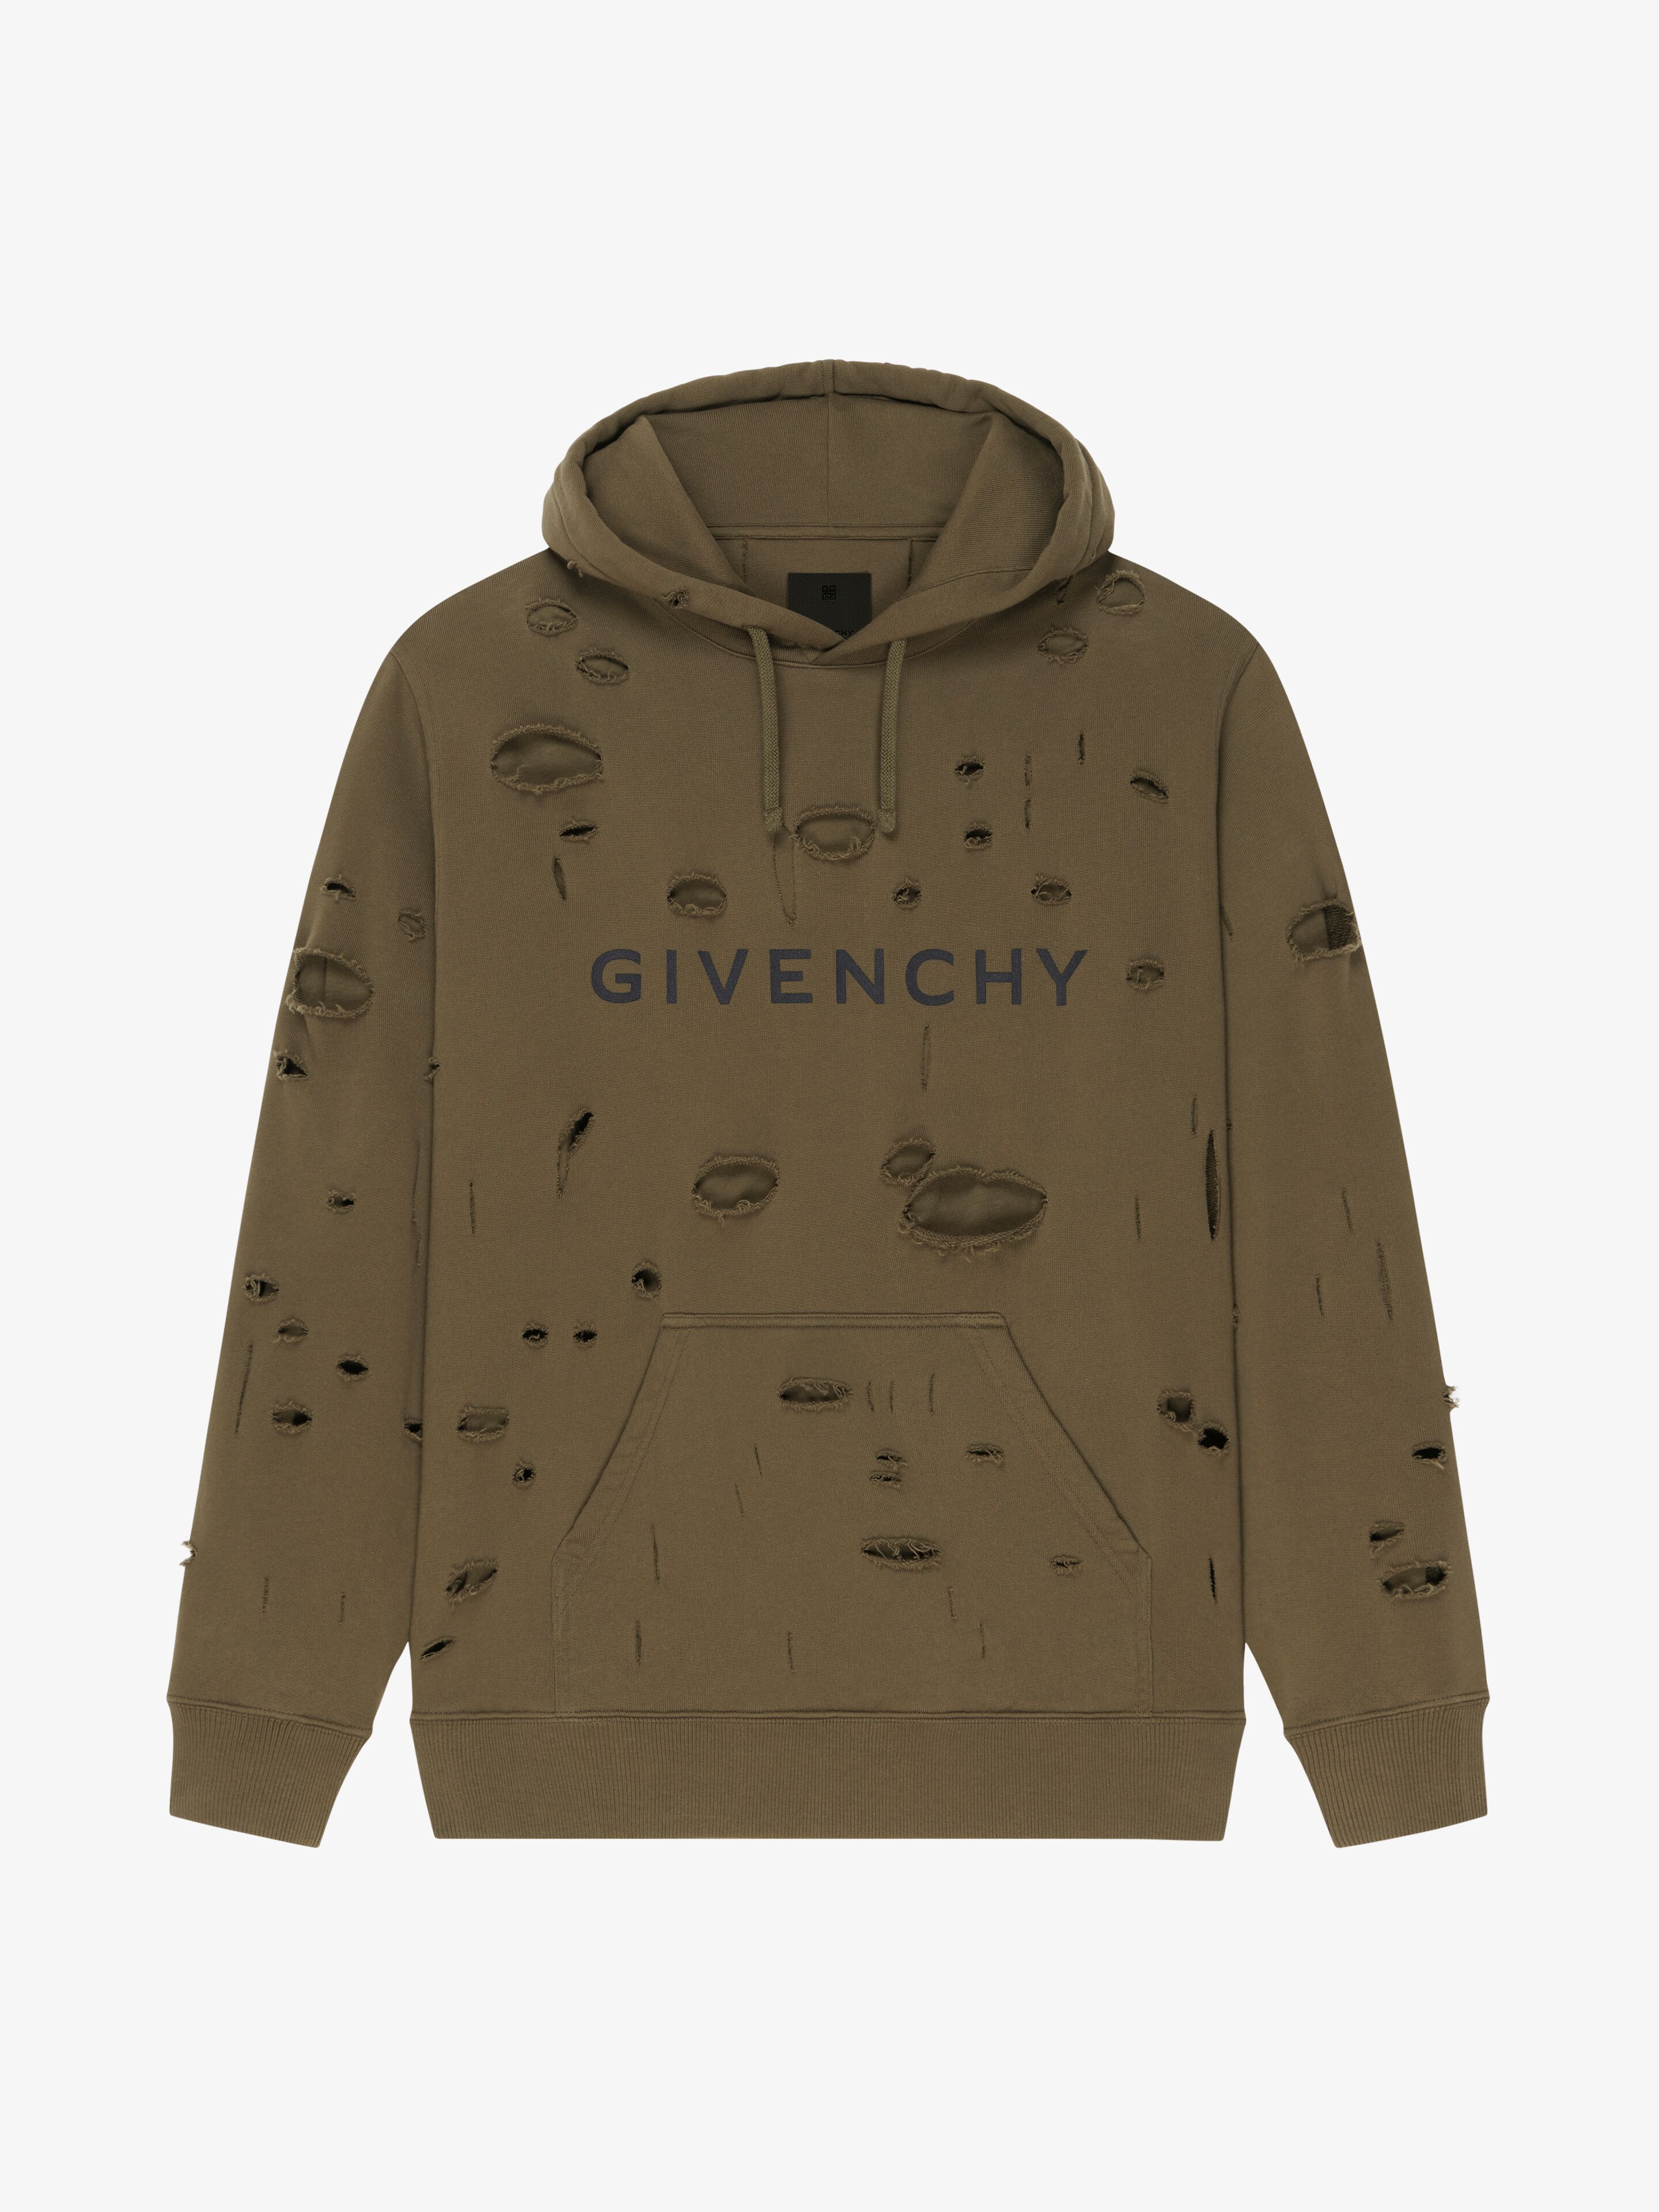 Shop GIVENCHY Givenchy hoodie in felpa with destroyed effect (BMJ0KF3Y8Y)  by ROHA